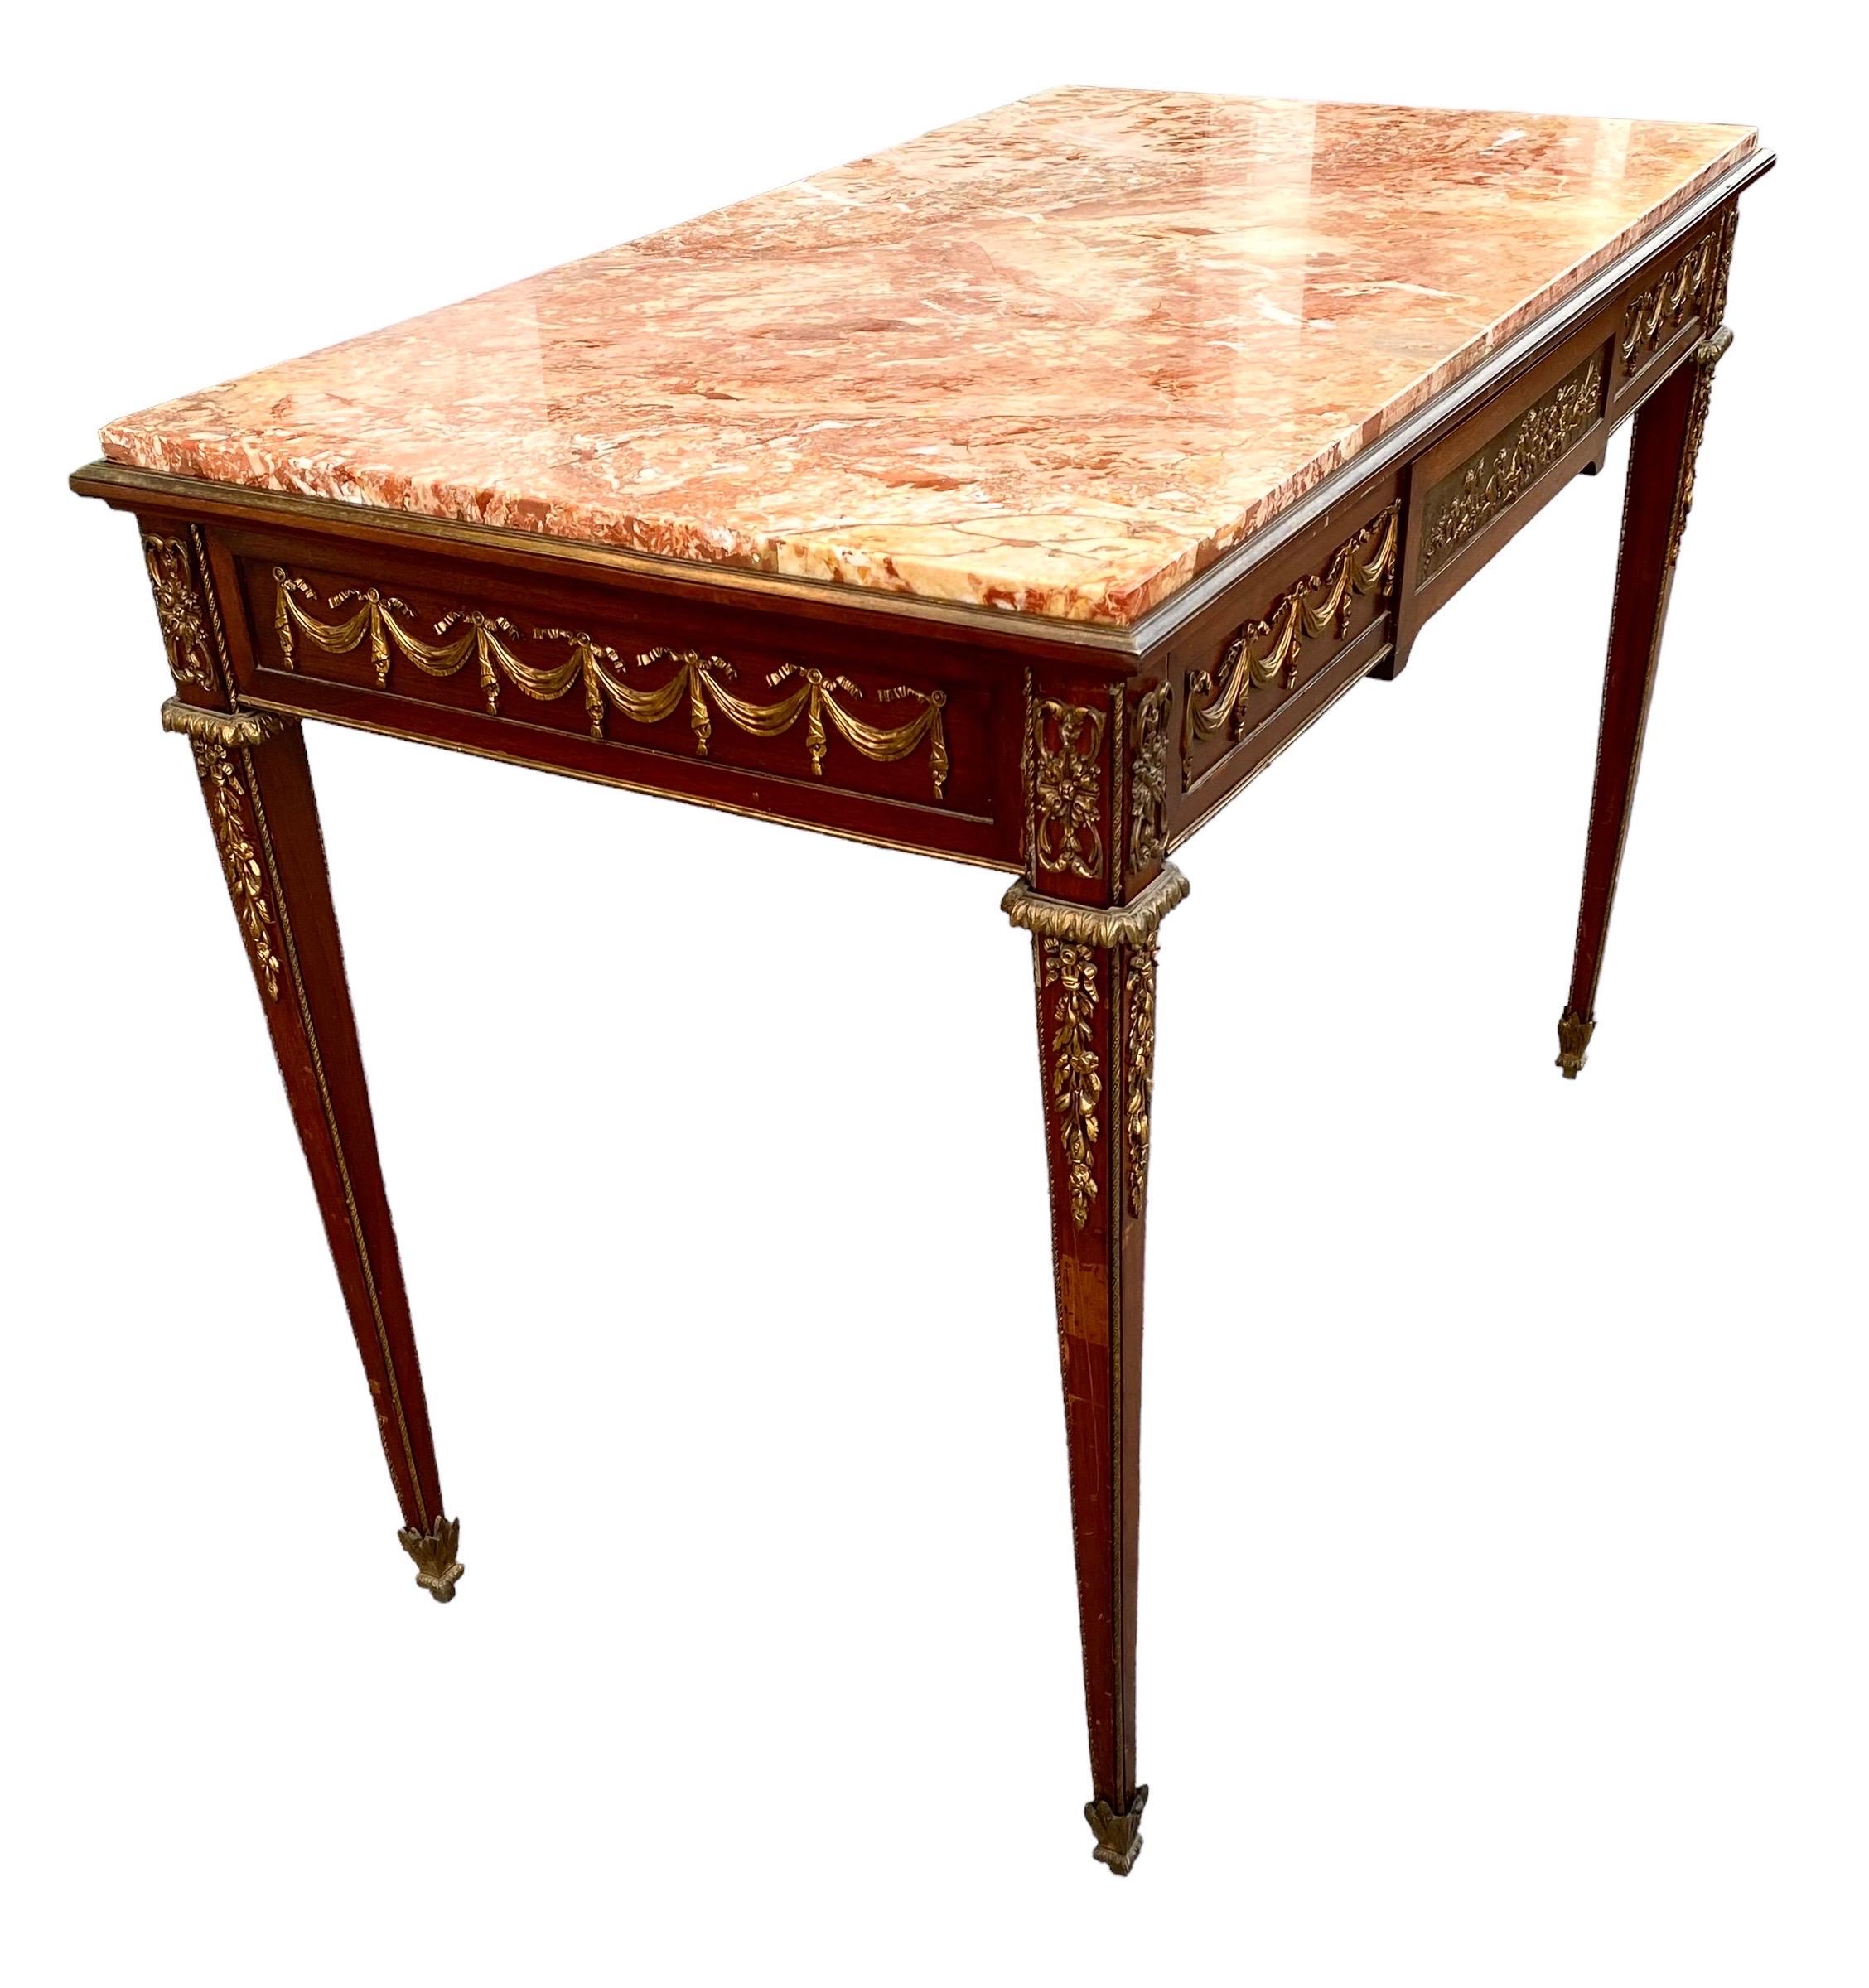 Early 20th Century French Early 20th C. Louis XVI St. Mahogany, Ormolu and Marble Console Table For Sale